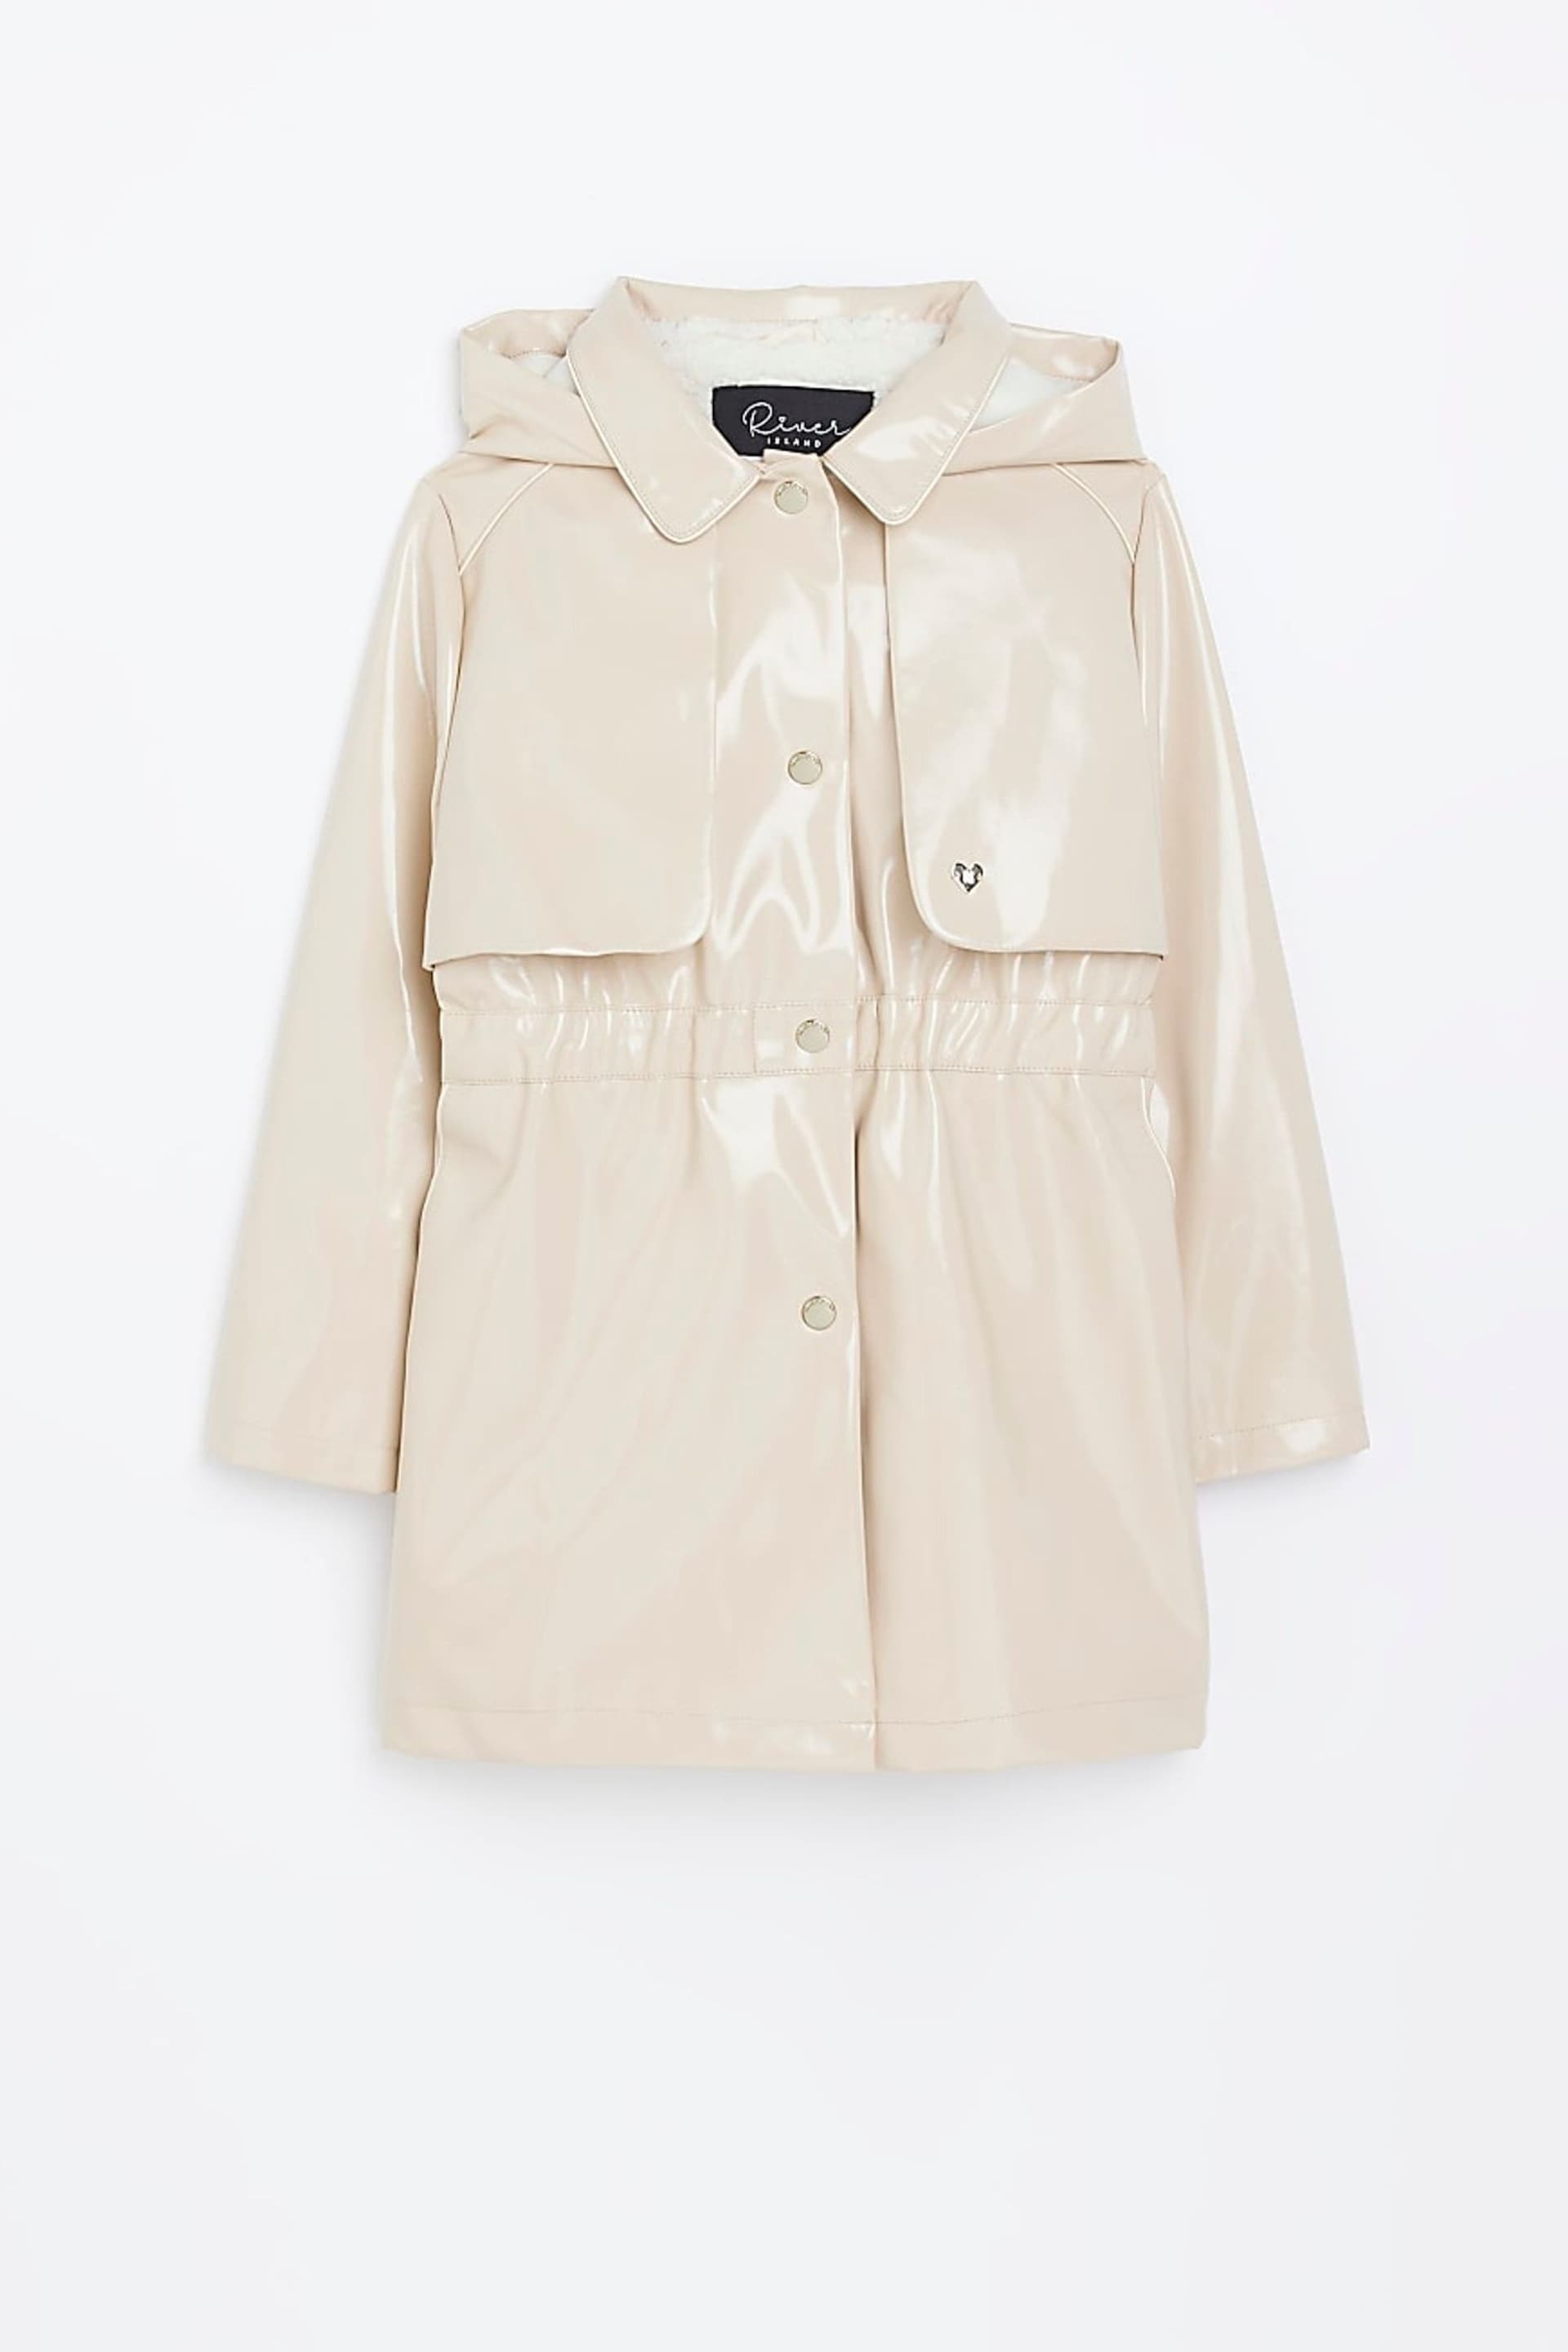 River Island Brown Girls Glam Trench Coat - Image 1 of 4